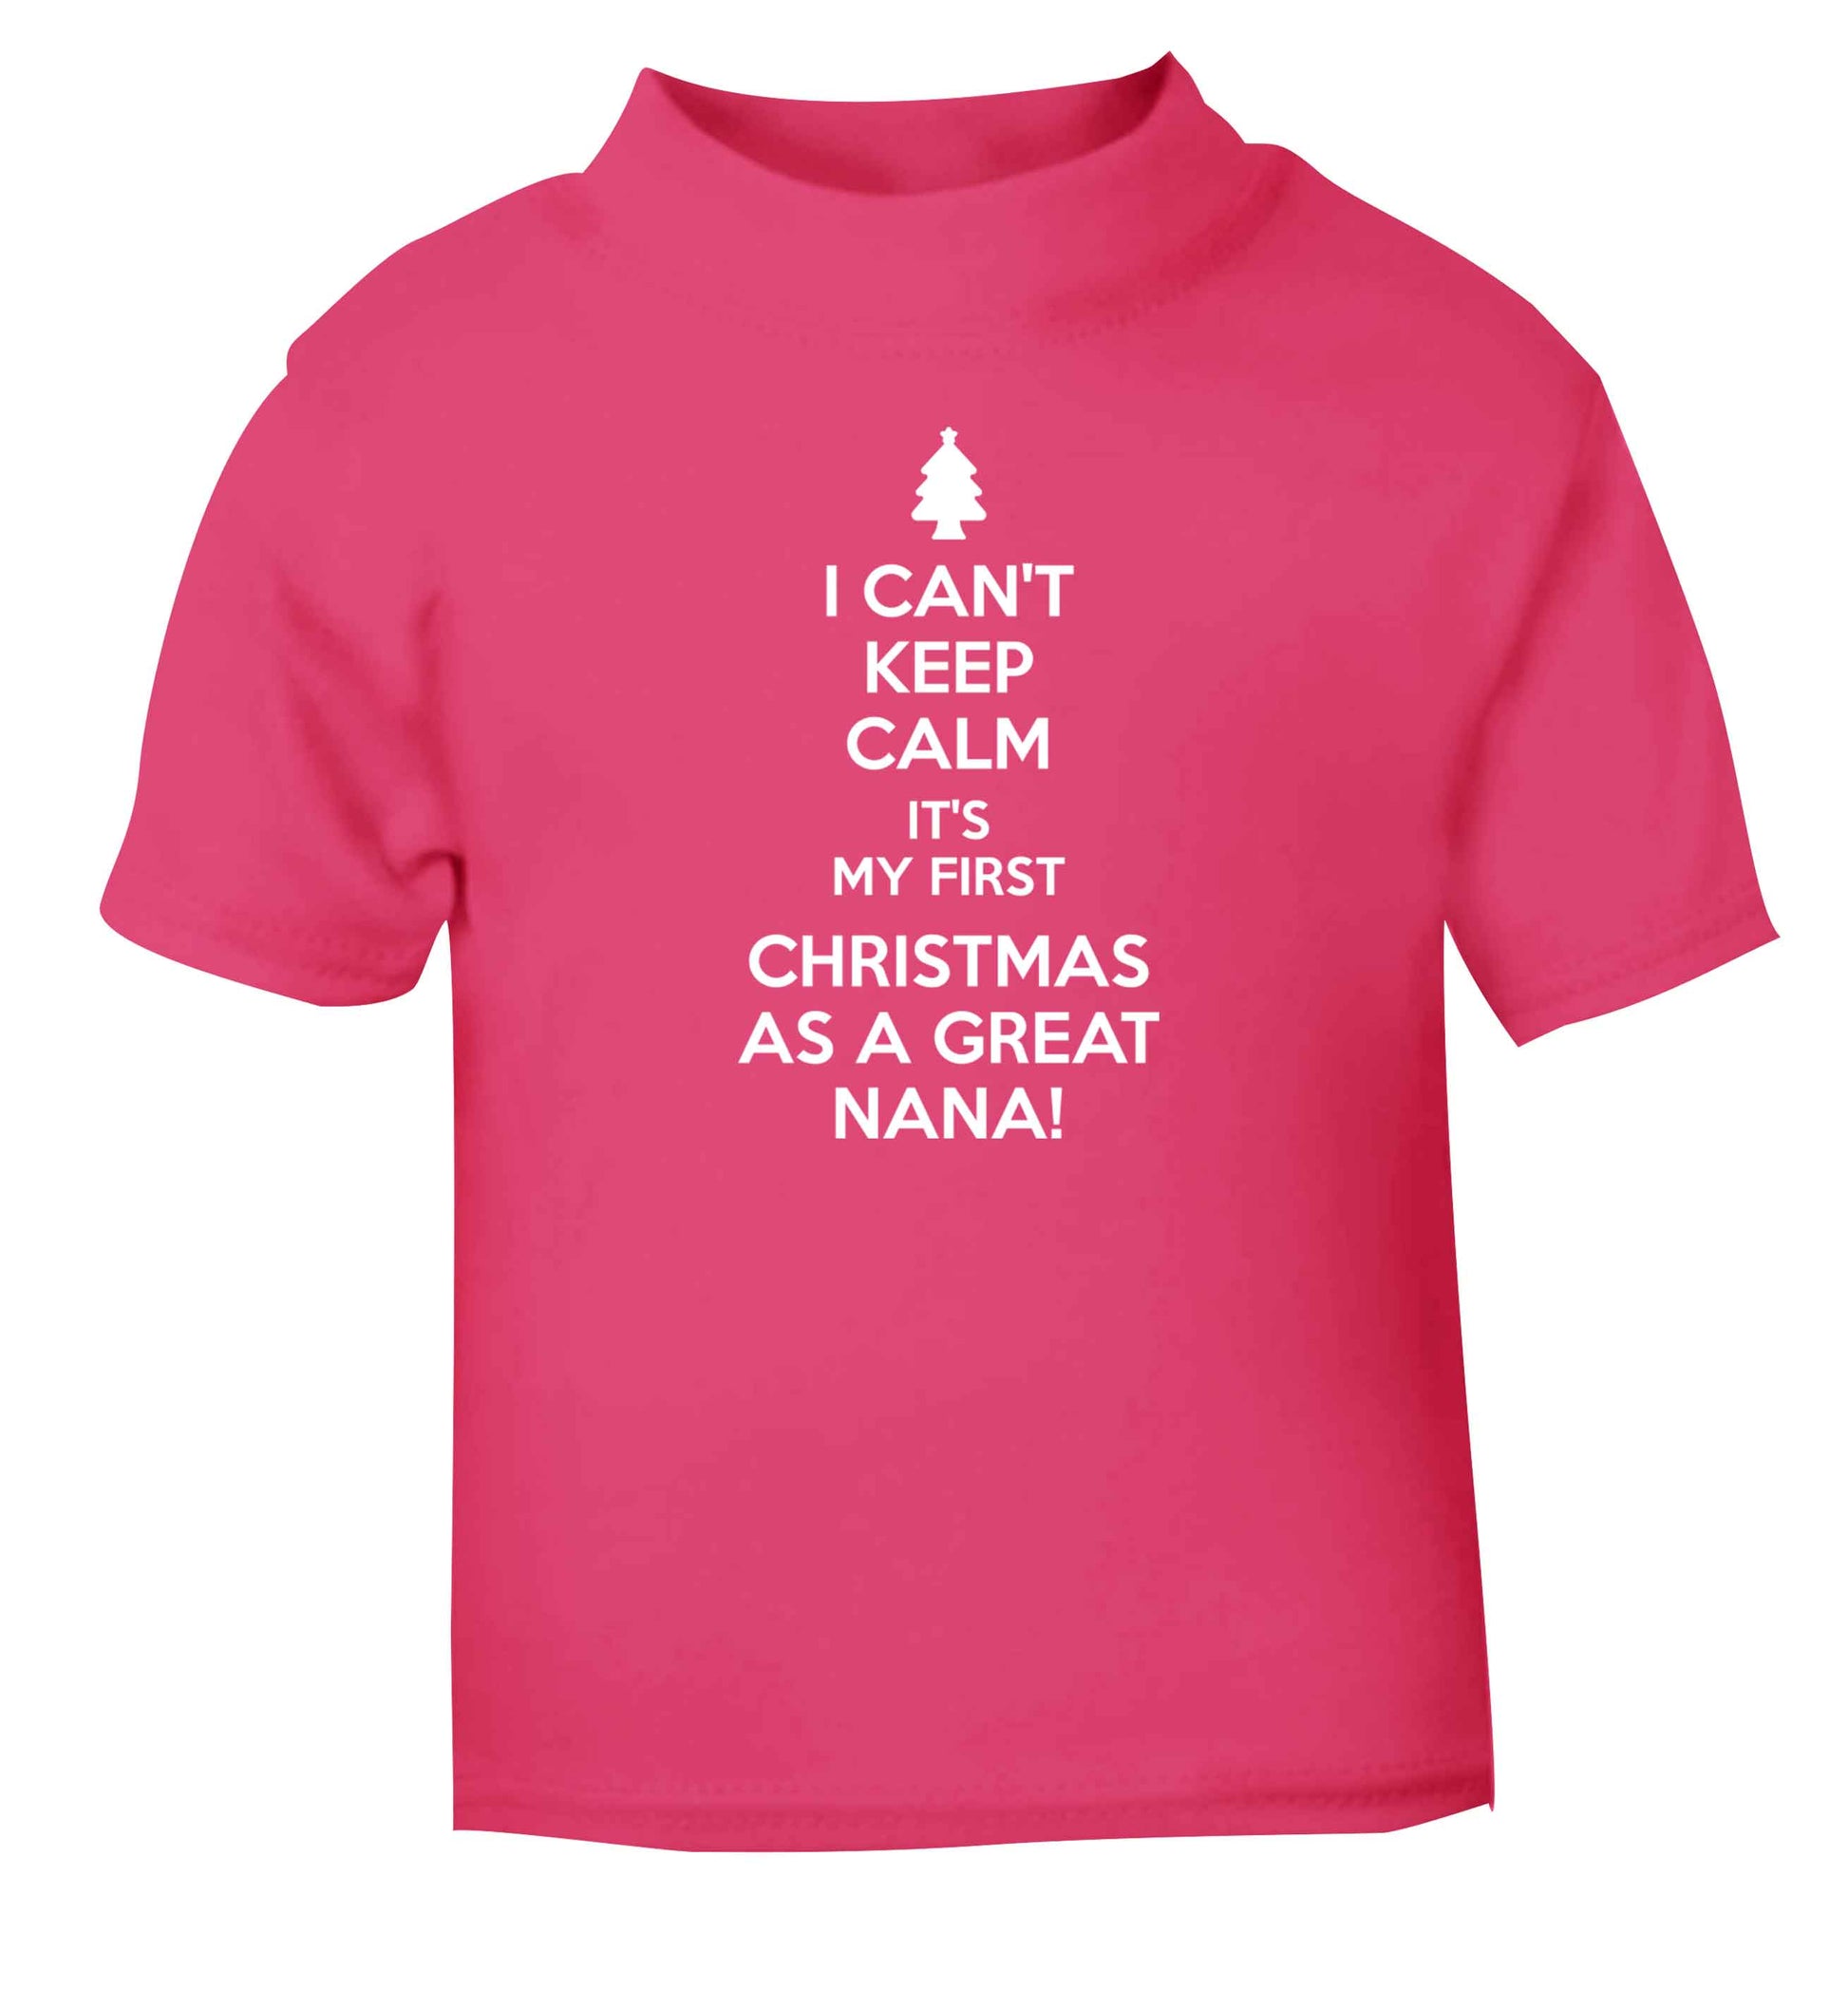 I can't keep calm it's my first Christmas as a great nana! pink Baby Toddler Tshirt 2 Years